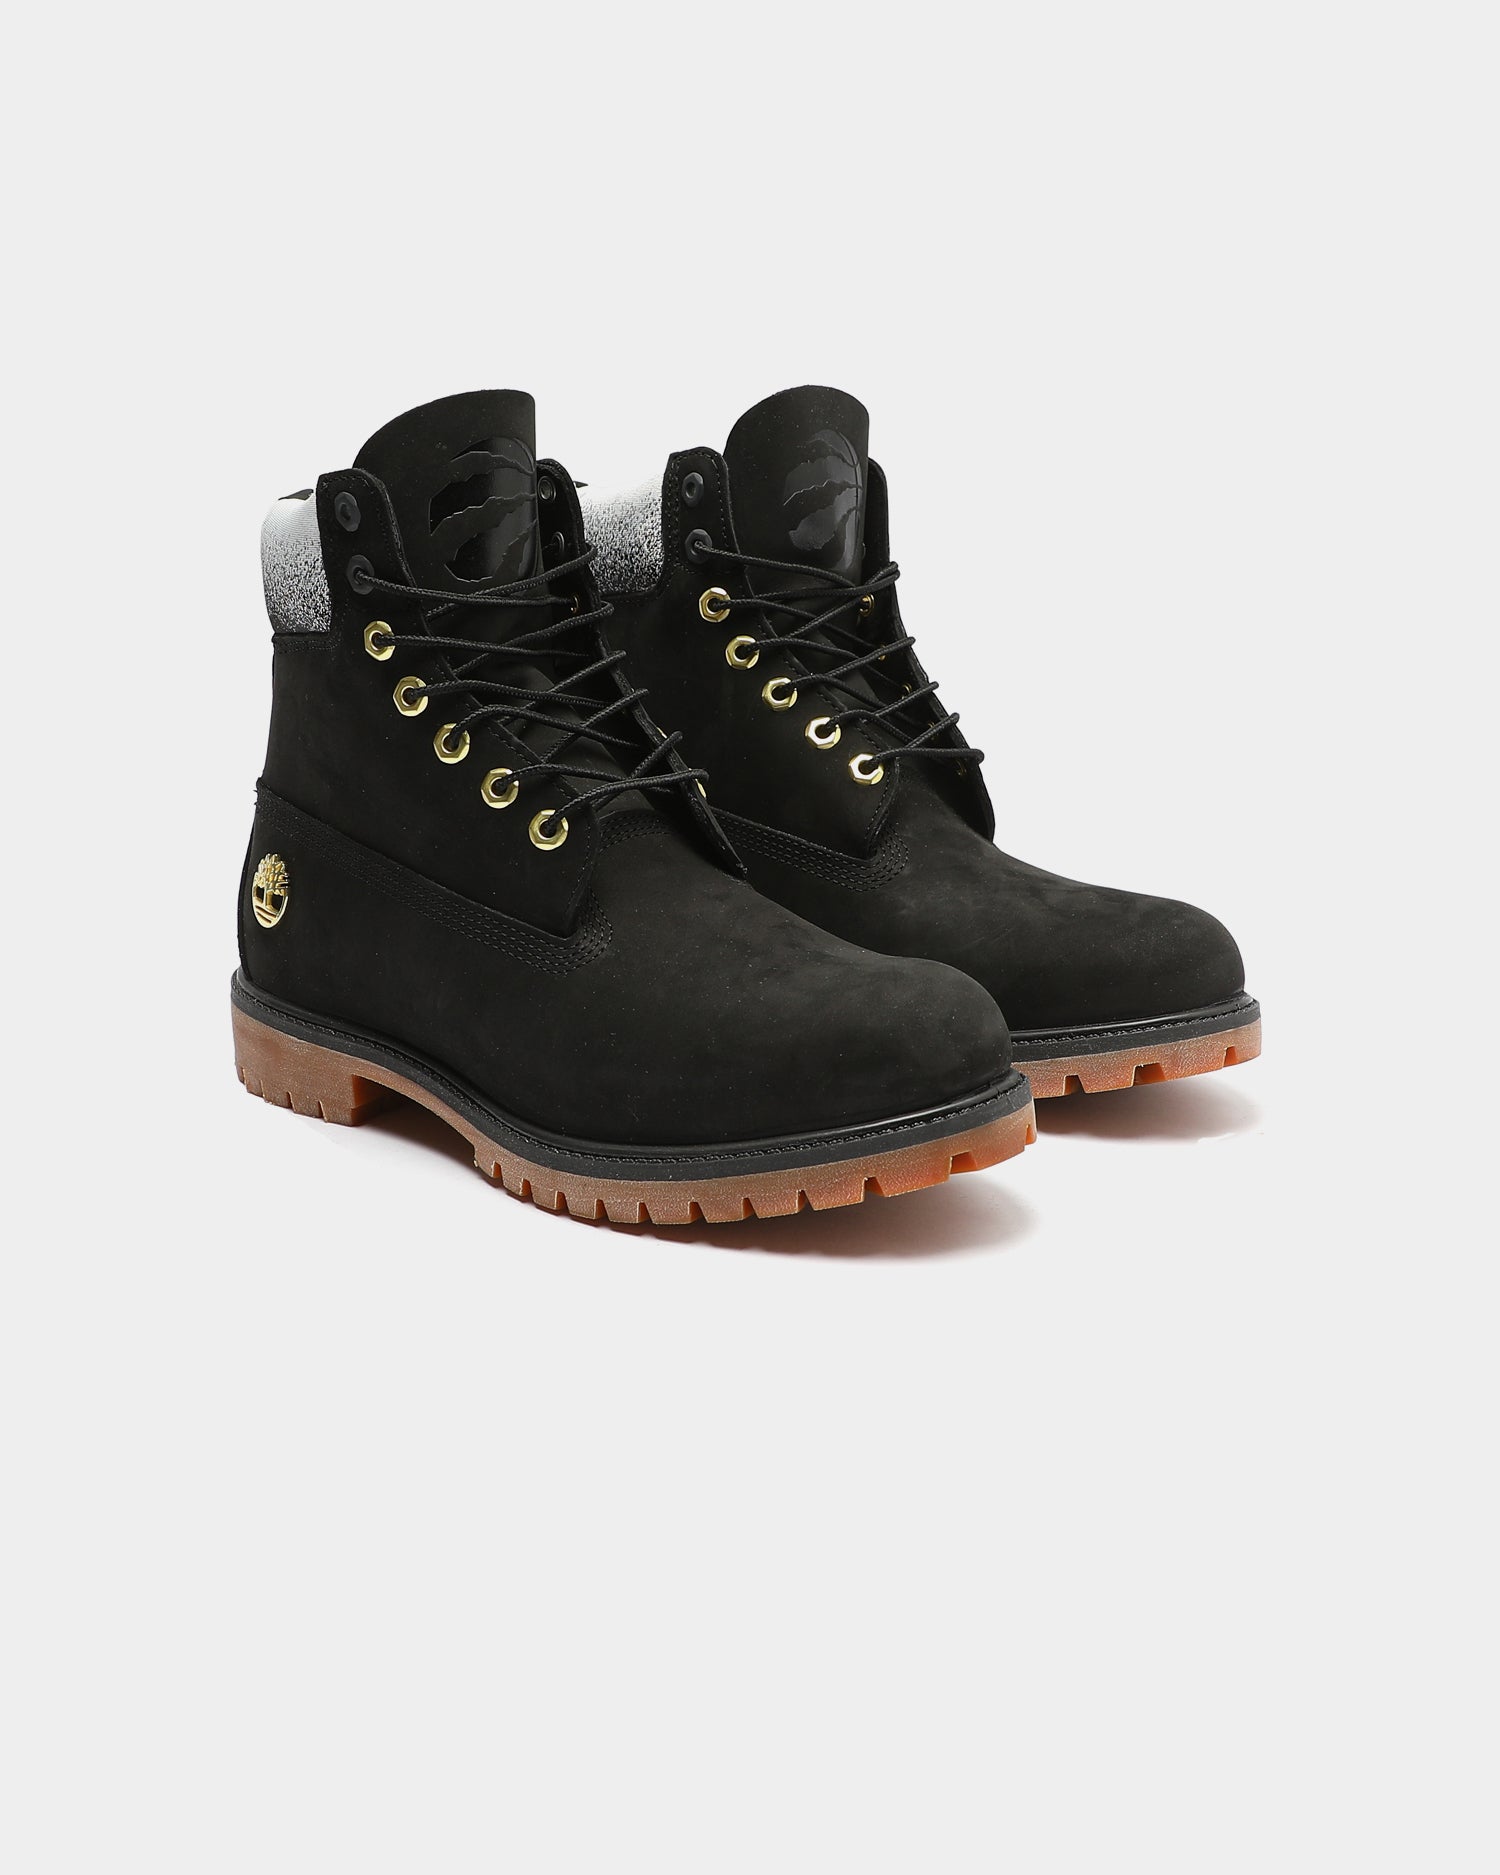 mens black and gold timberland boots